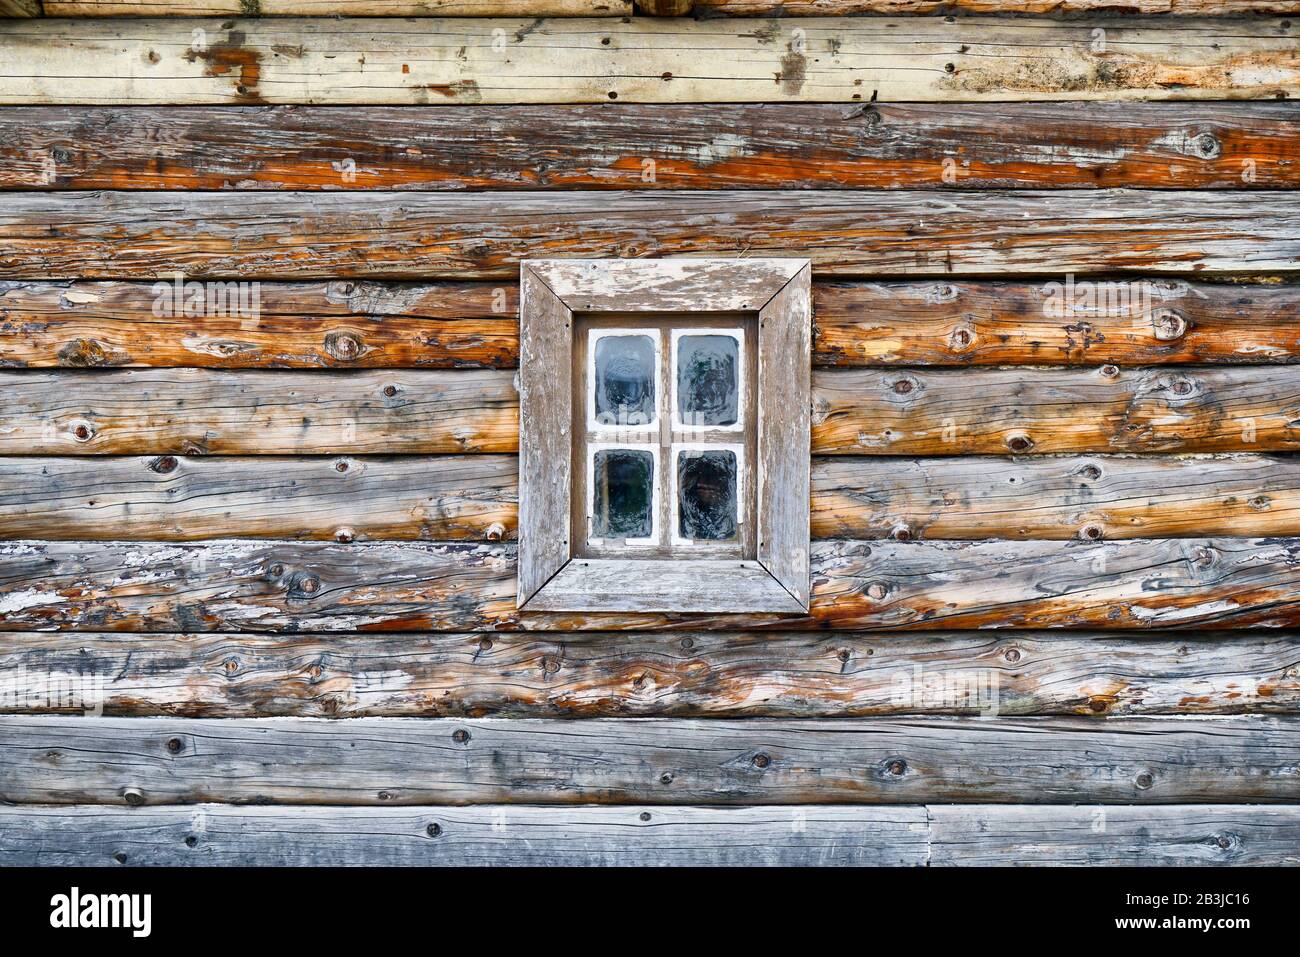 Facade of an old log house with a small window Stock Photo